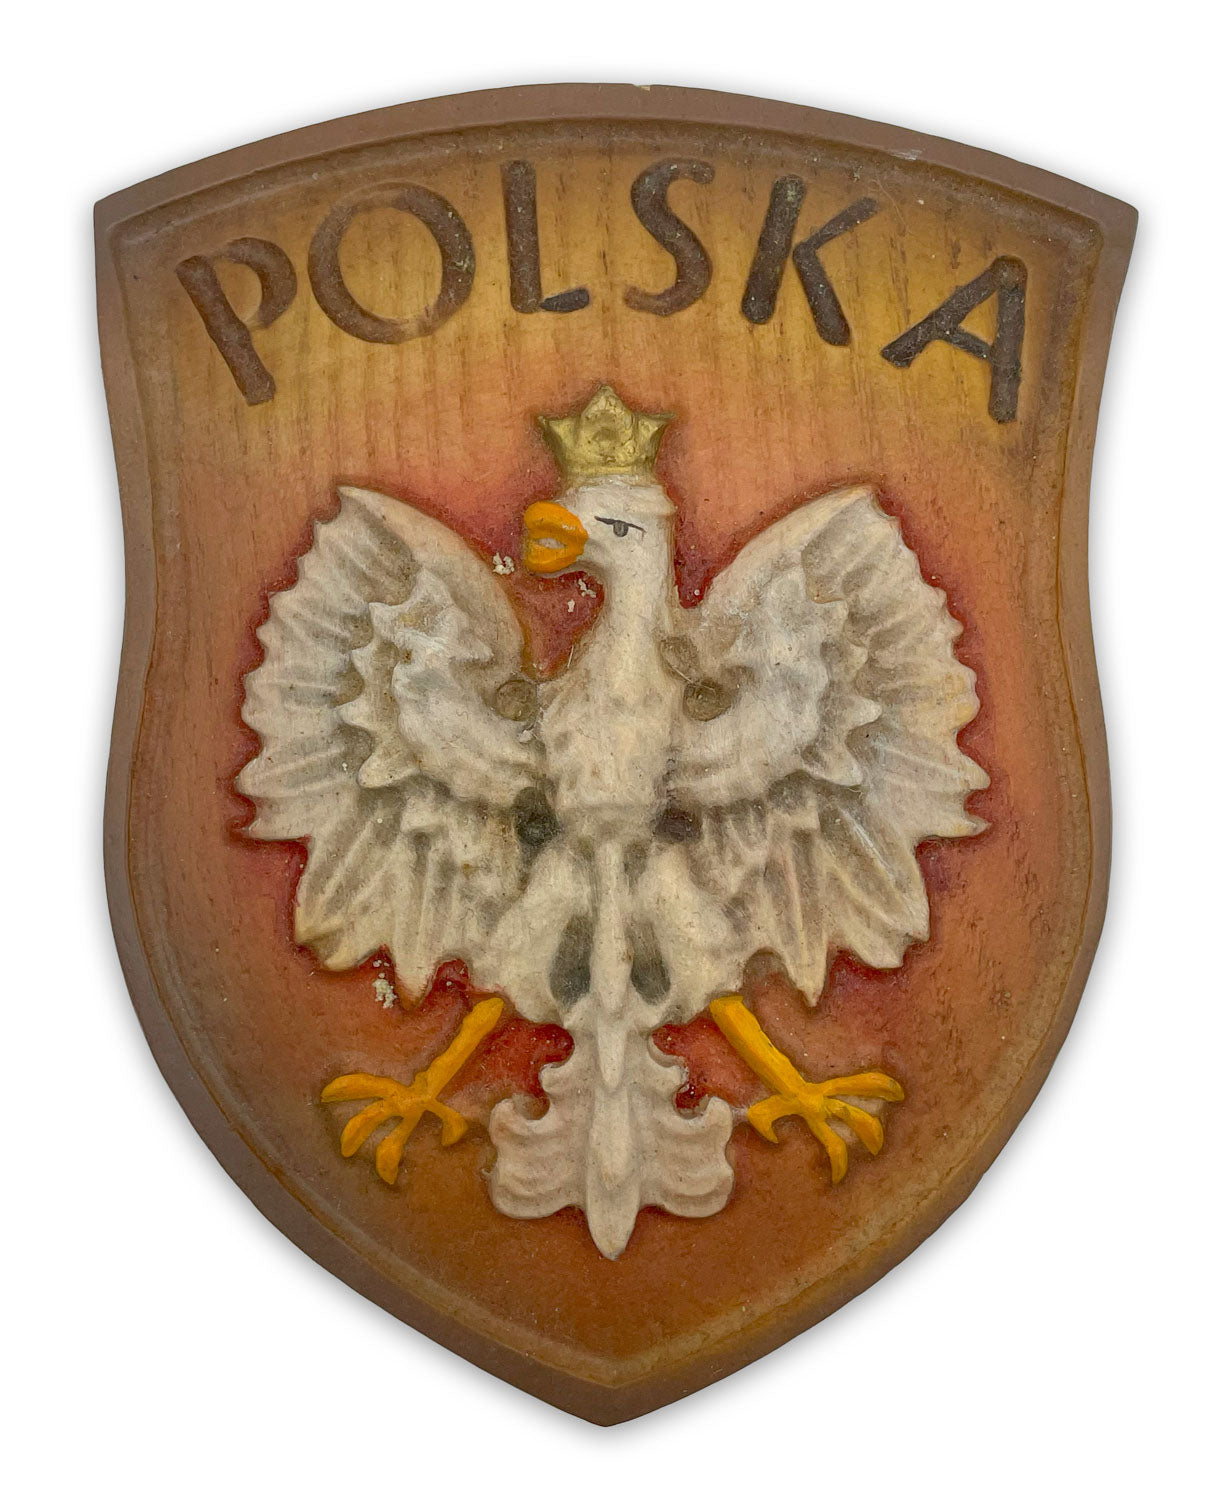 Wood Carved Coat of Arms of Poland, Small